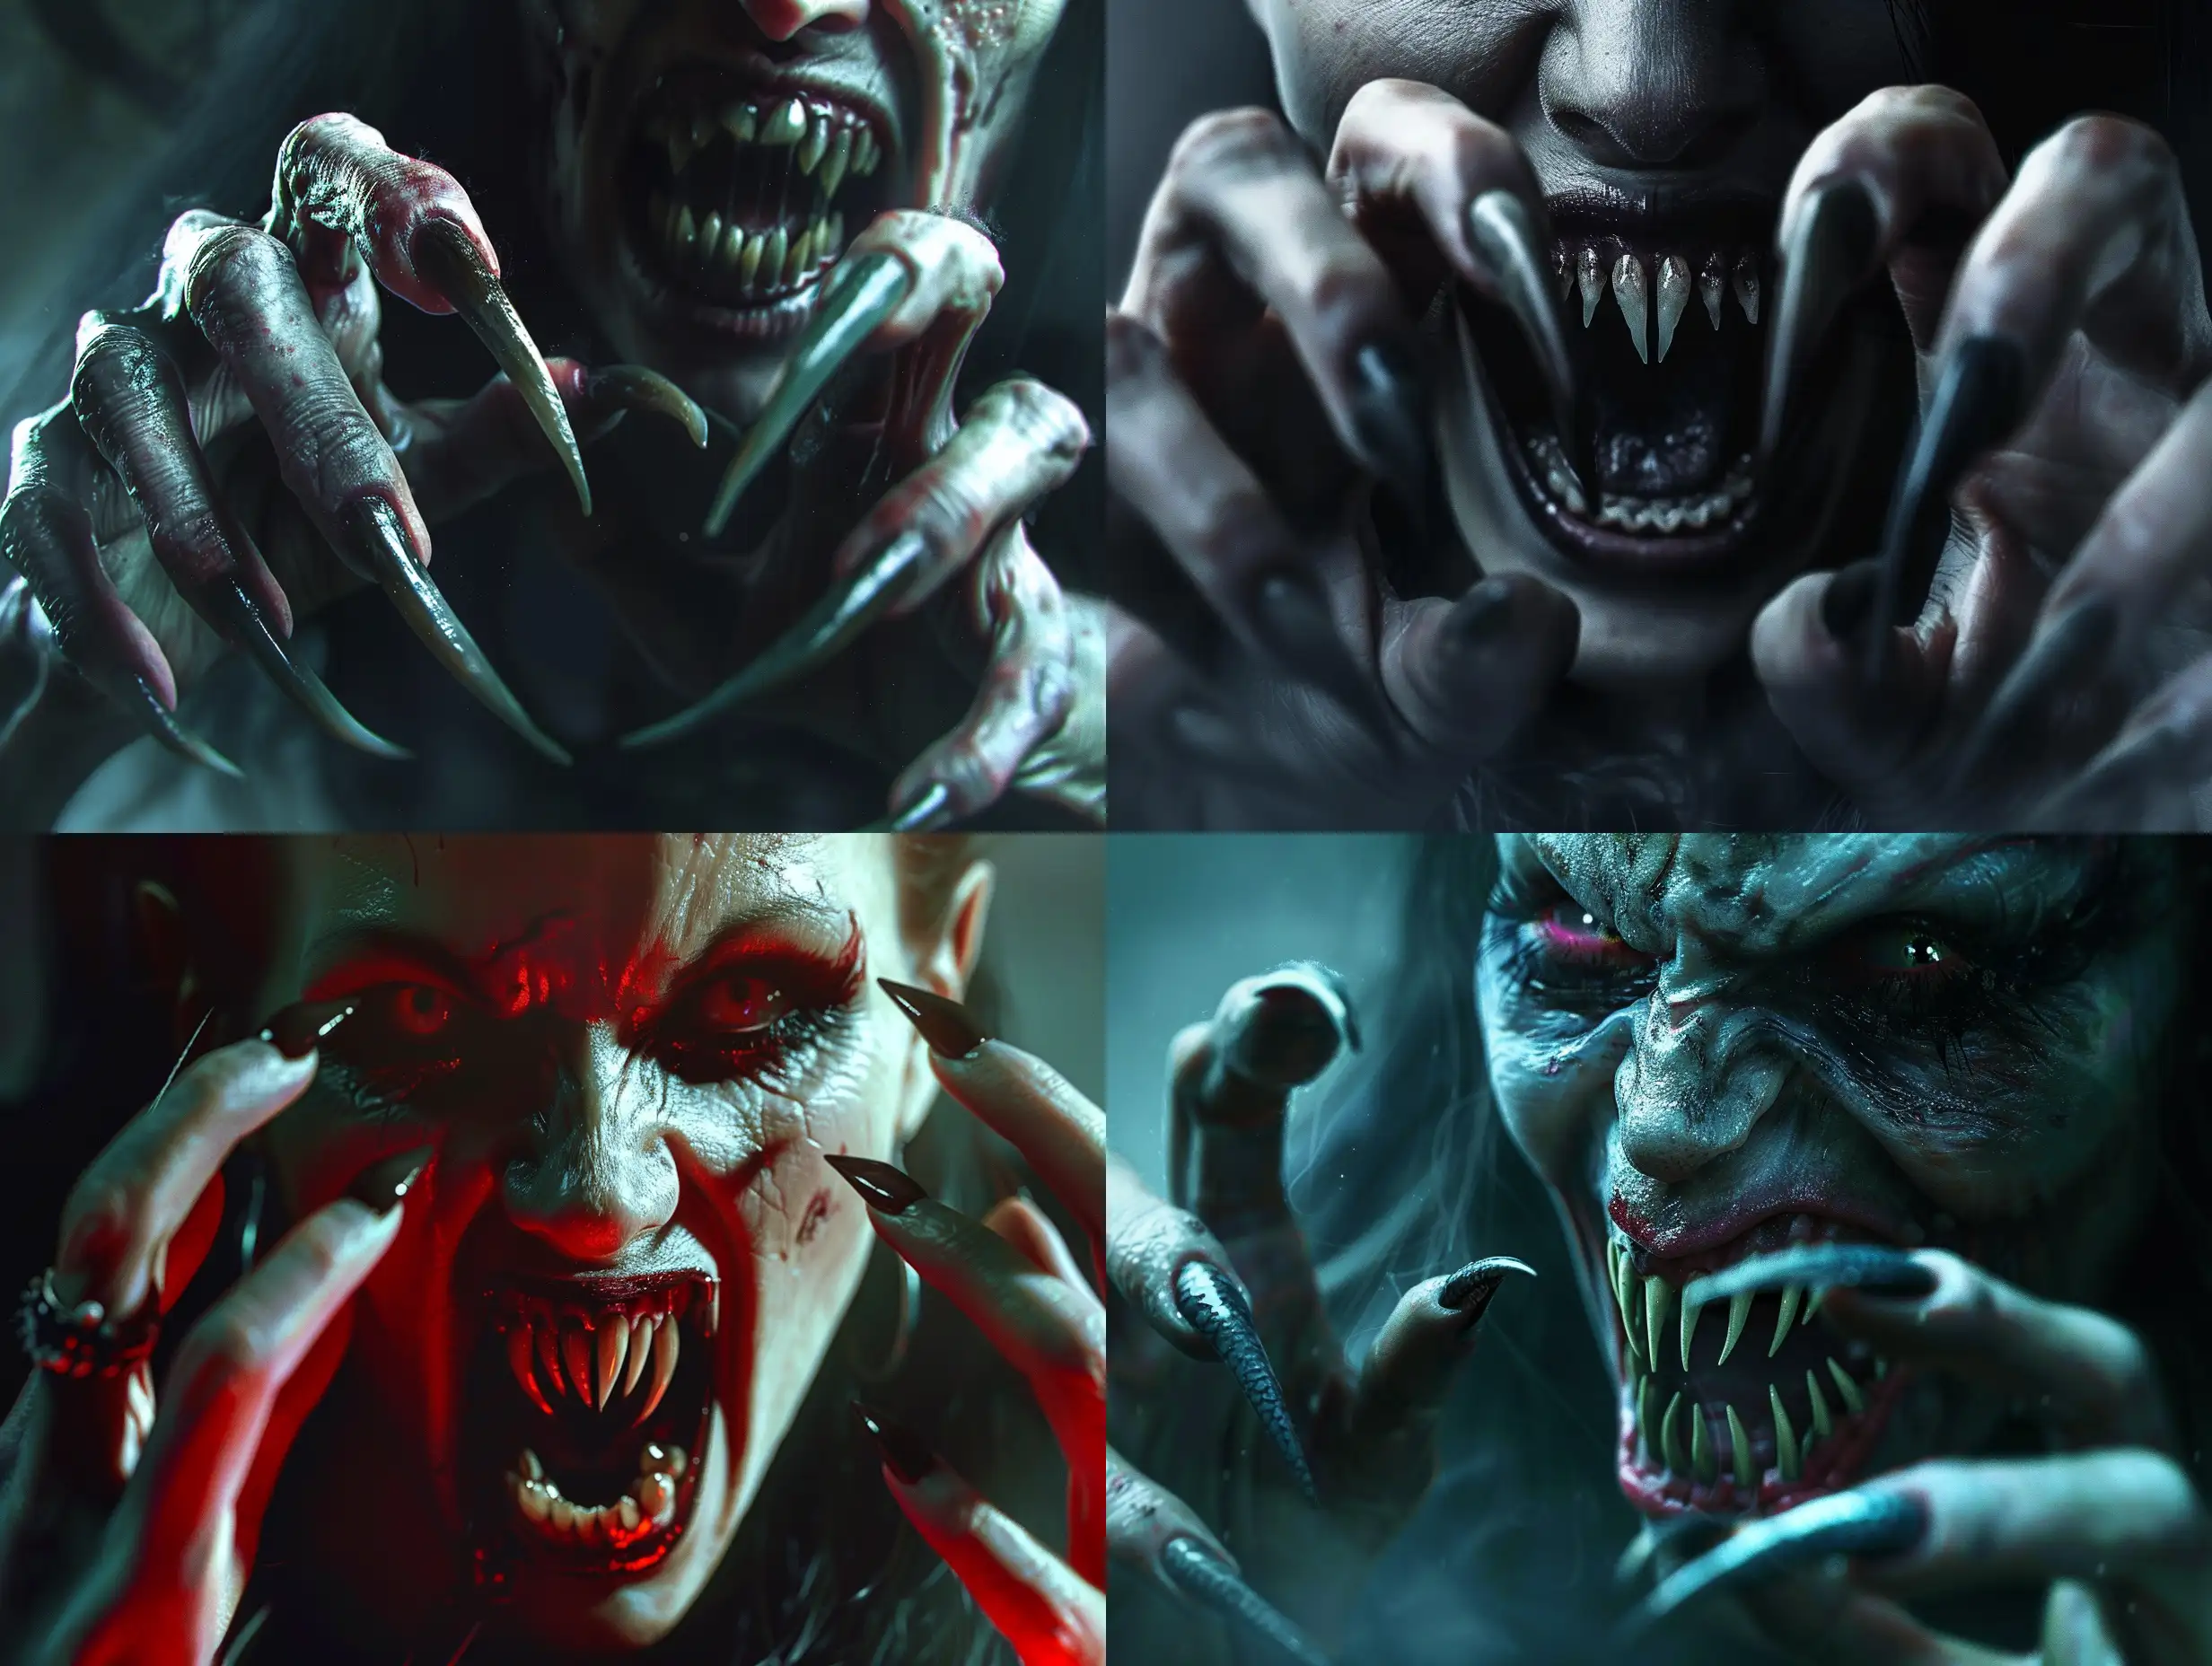 Photorealism of a monstrous female vampire with long, curved, pointed nails, exuding an aggressive and terrifying presence. Her pointed, crooked teeth convey a scary expression amidst a dark and atmospheric setting. The high-quality, photorealistic depiction should emphasize the aggressive and scary predator nature, showcasing detailed nails and fangs. The lighting should create an atmospheric and horrifying ambiance. The full-body portrayal should exhibit realistic hyper-detail, capturing playful character designs and full anatomical features, including distinctly human hands with five clear fingers without flaws.